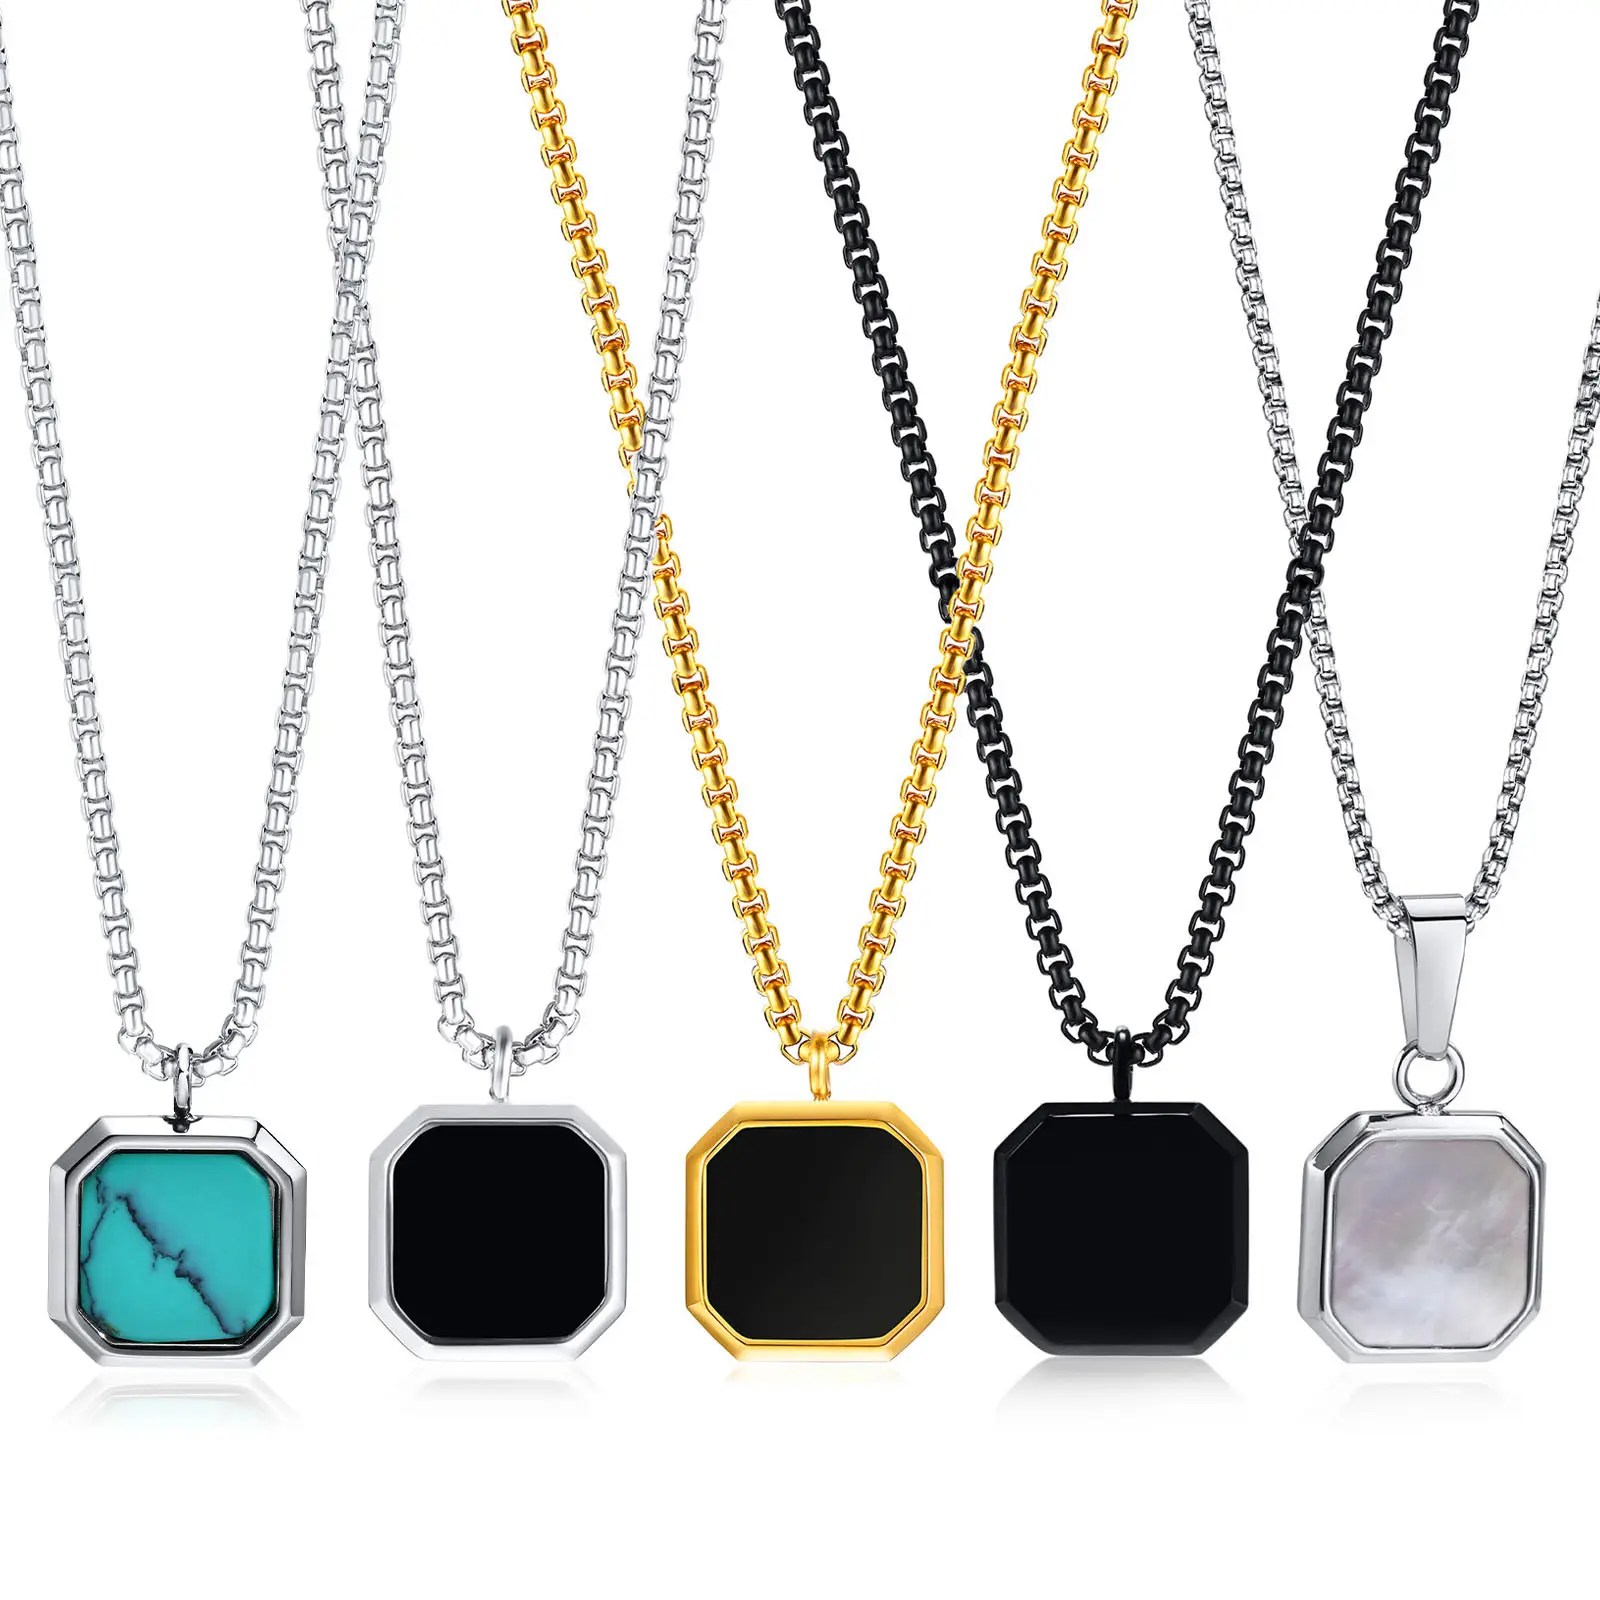 Unisex Stainless Steel Epoxy Black Square Pendant Necklace Long Sweater Gold Plated Chain Necklaces For Men and Women